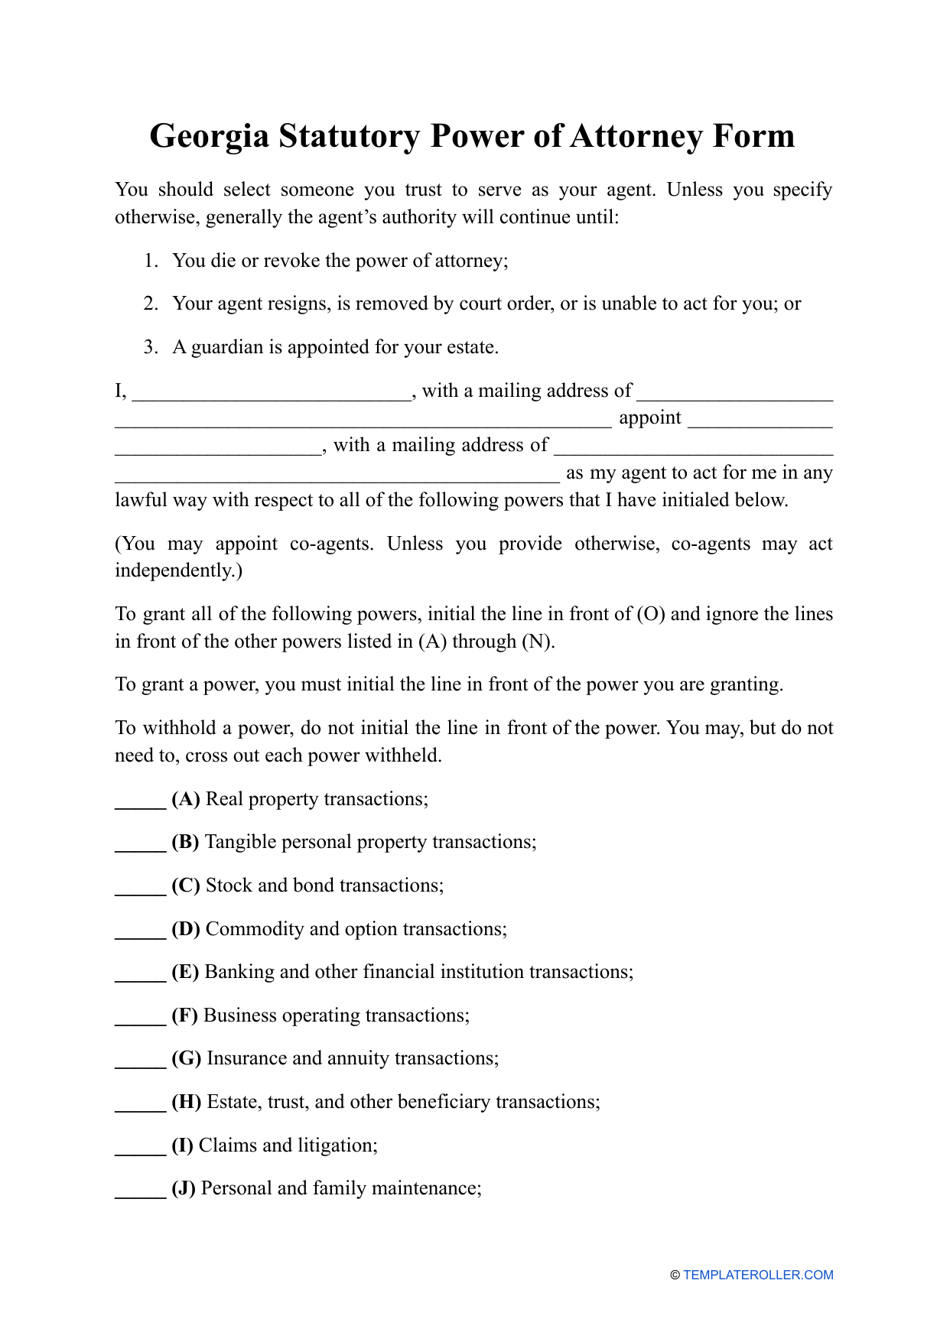 Statutory Power of Attorney Form - Georgia (United States), Page 1